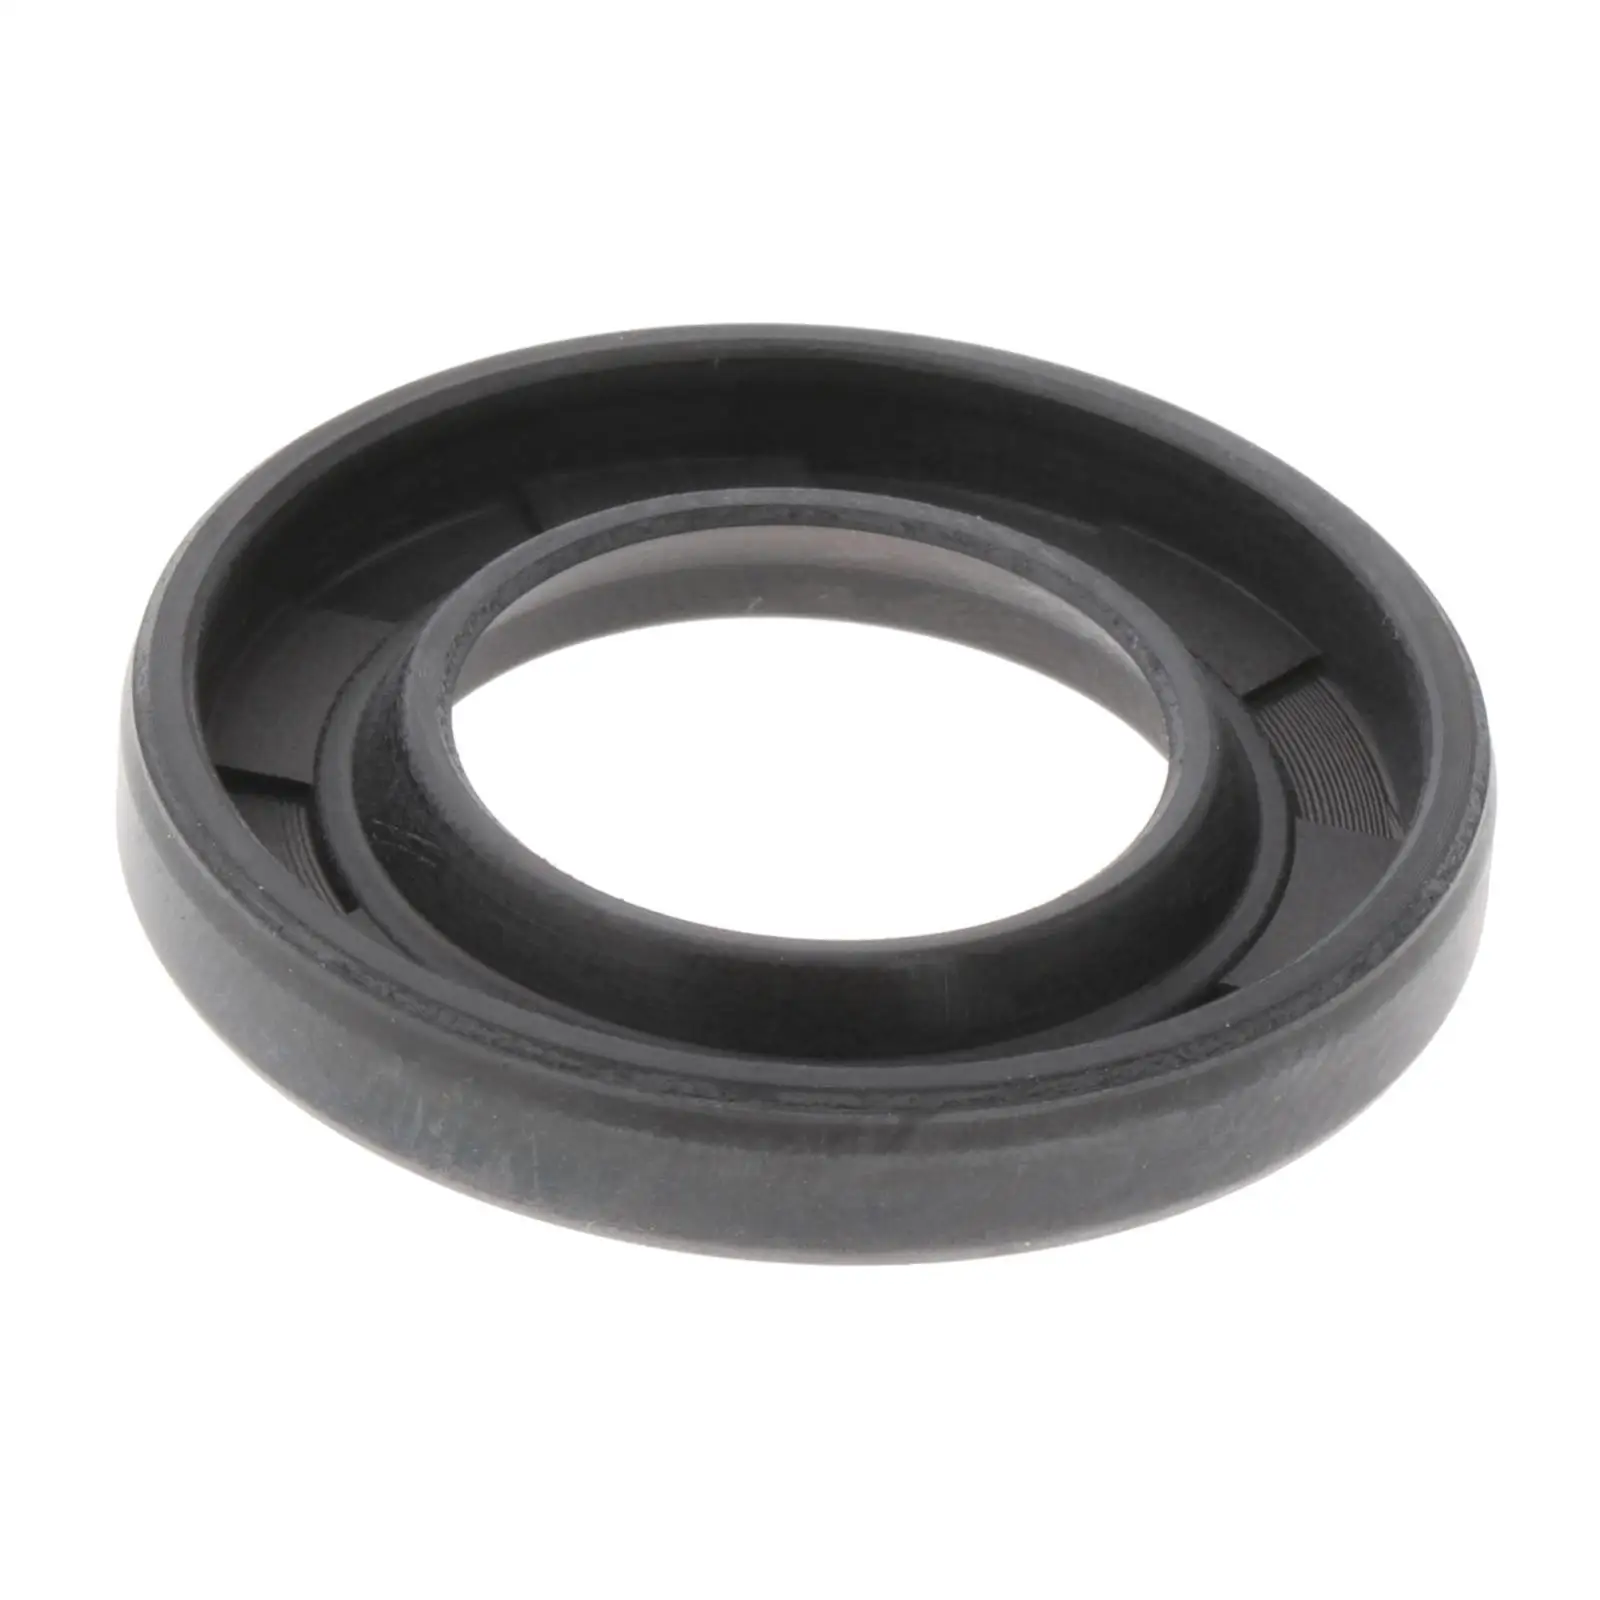 Oil Seal Replaces Fit for Yamaha Outboard 60HP 70HP Outboard Engine 2T 3cyl